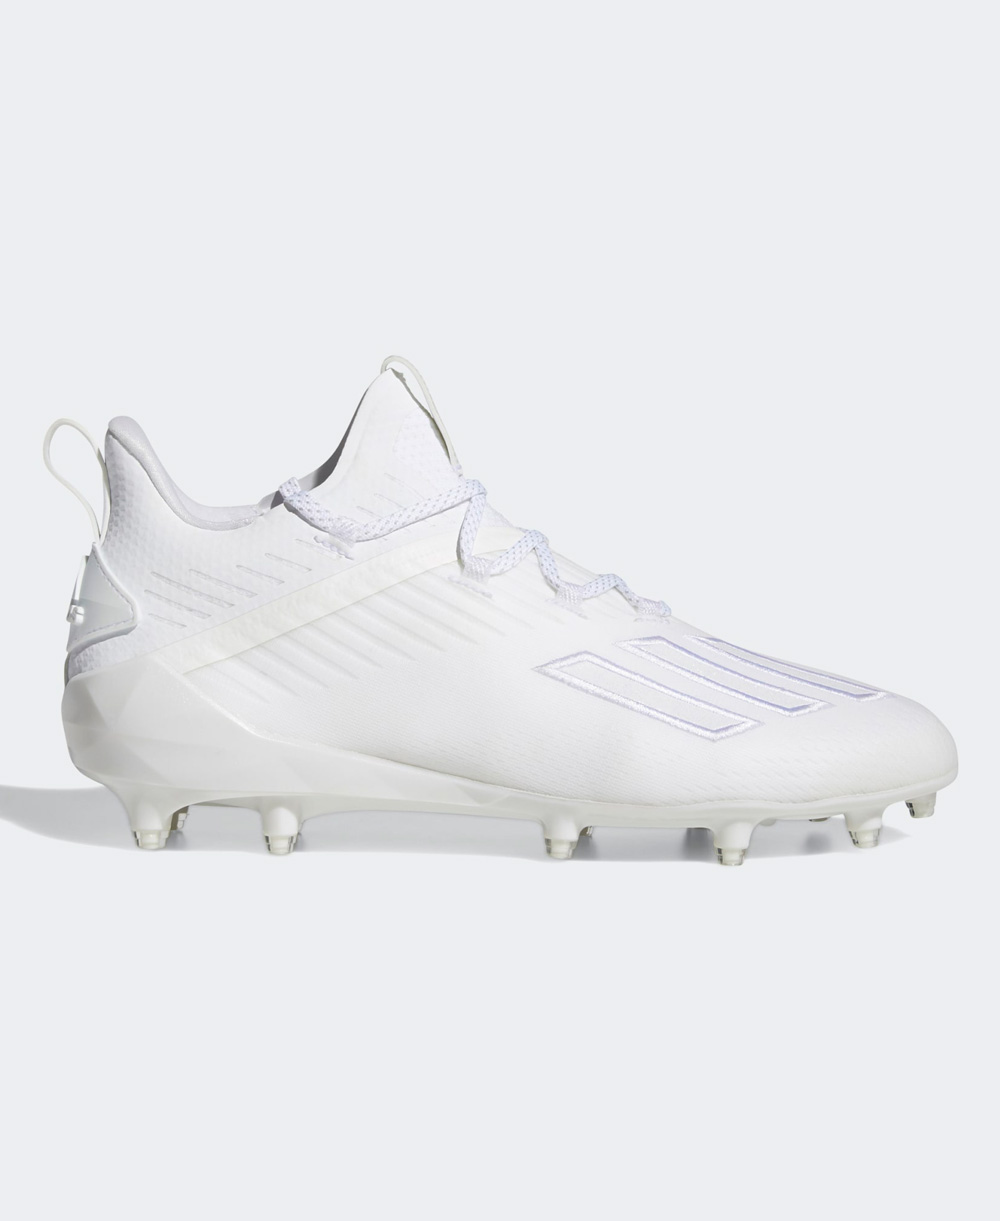 white highlight cleats